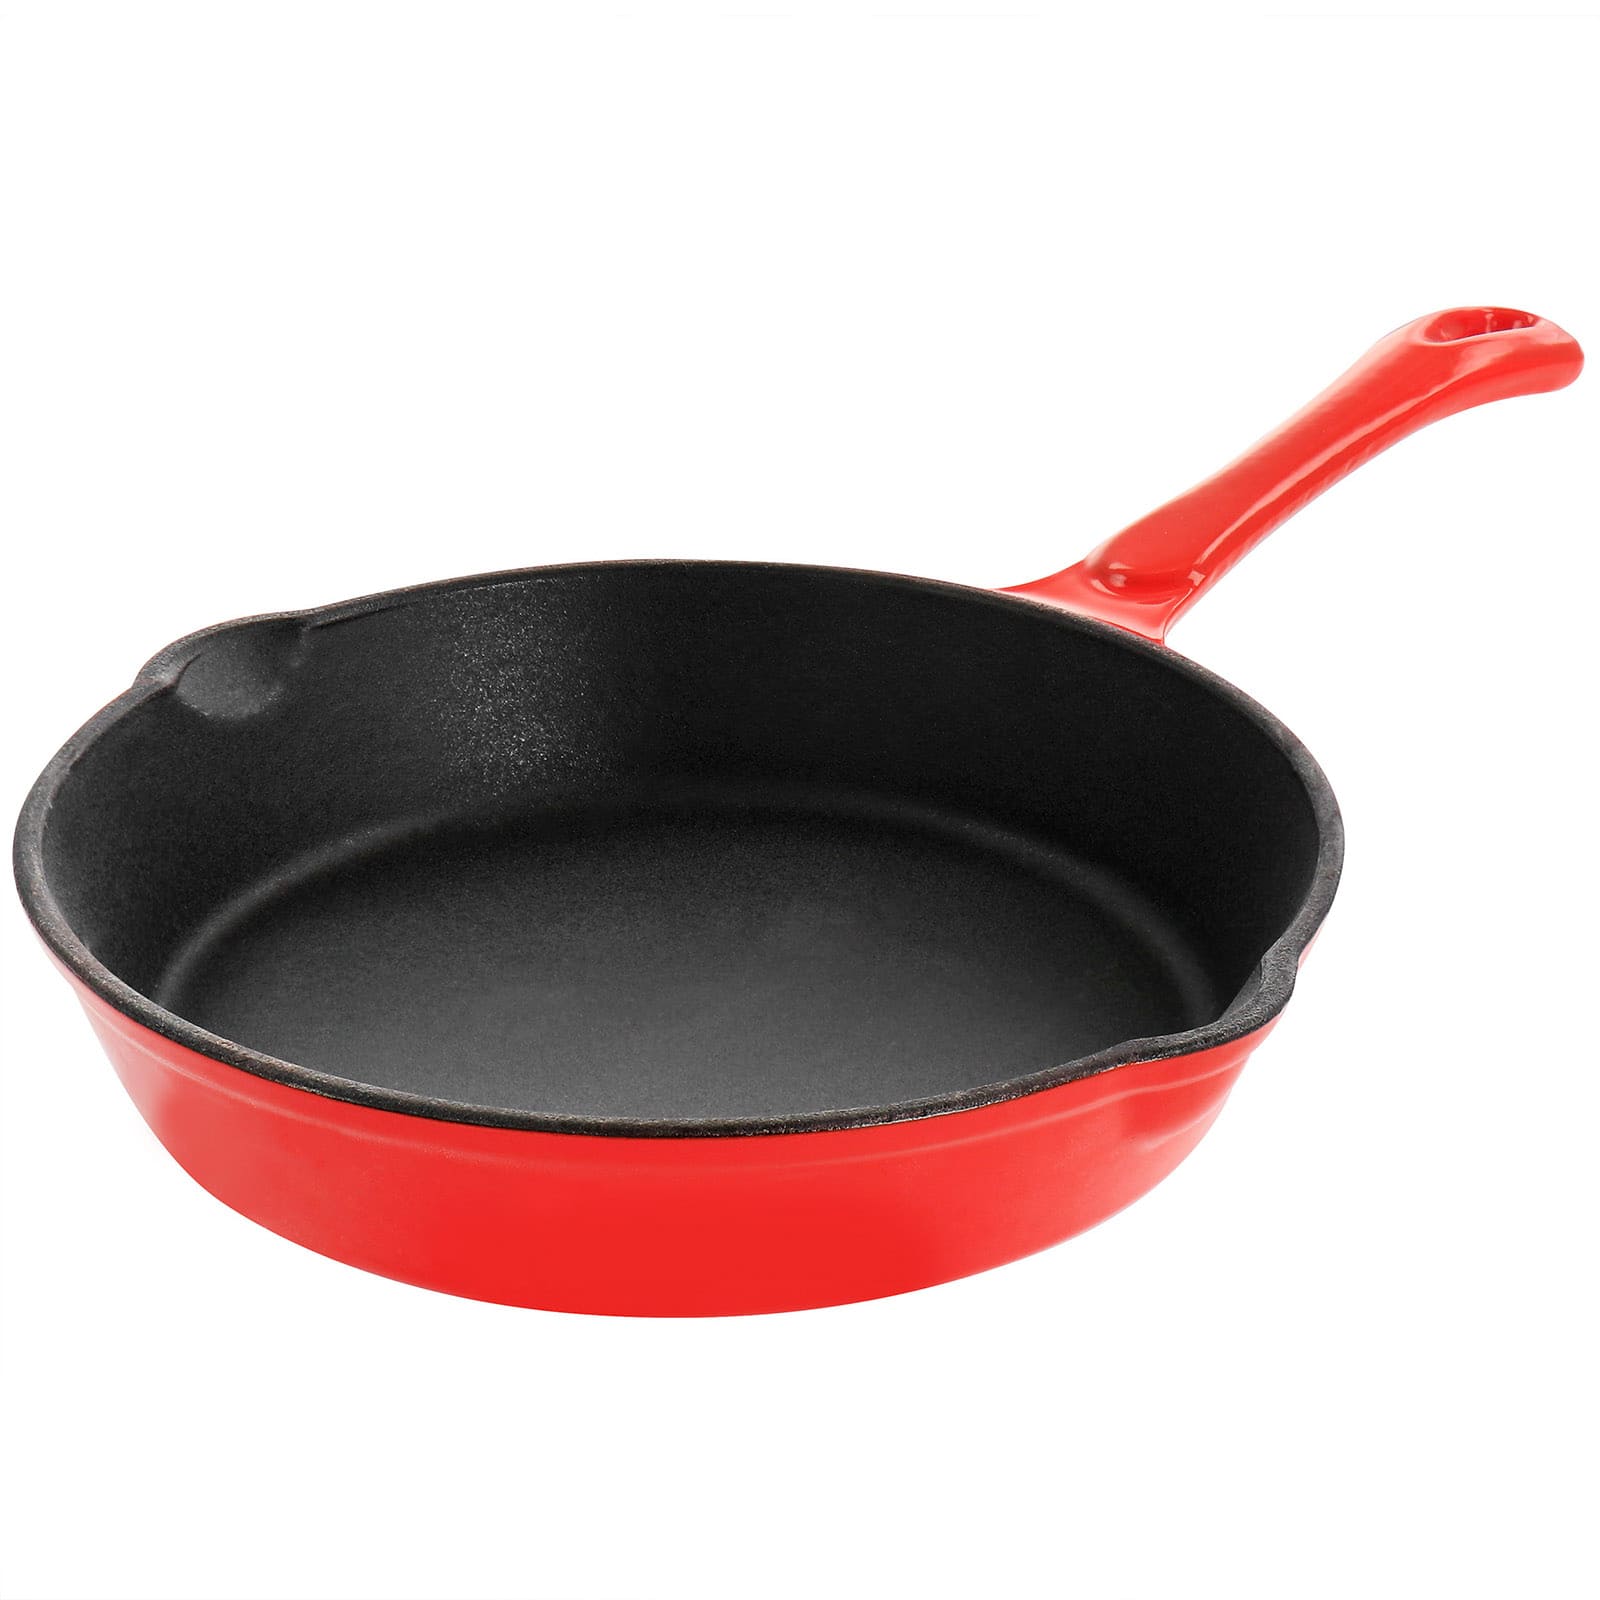 Spice by Tia Mowry Savory Saffron Pre-Seasoned 2 Piece 10in and 12in Cast Iron Skillet Set